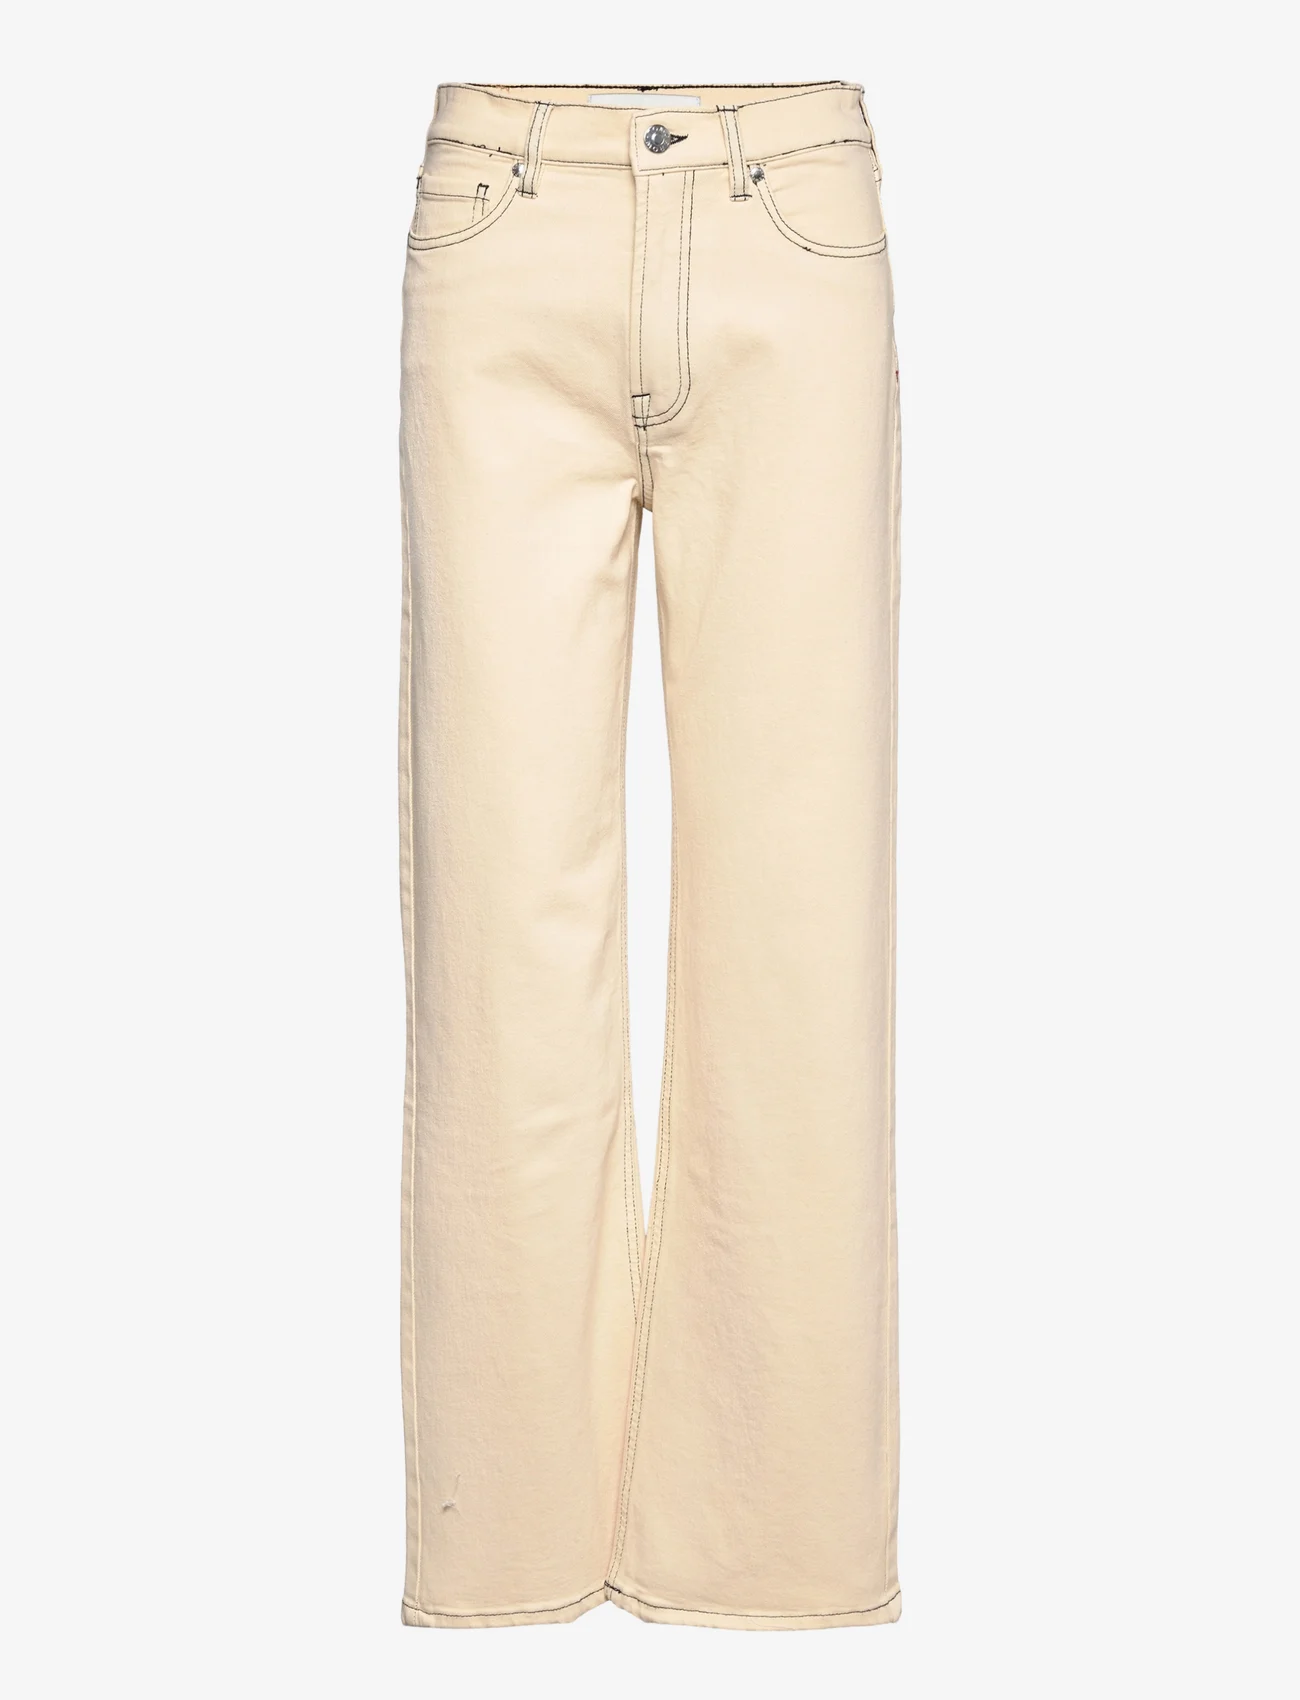 Tomorrow - Brown Straight Jeans Natural Color - hosen mit weitem bein - mariegold yellow - 0